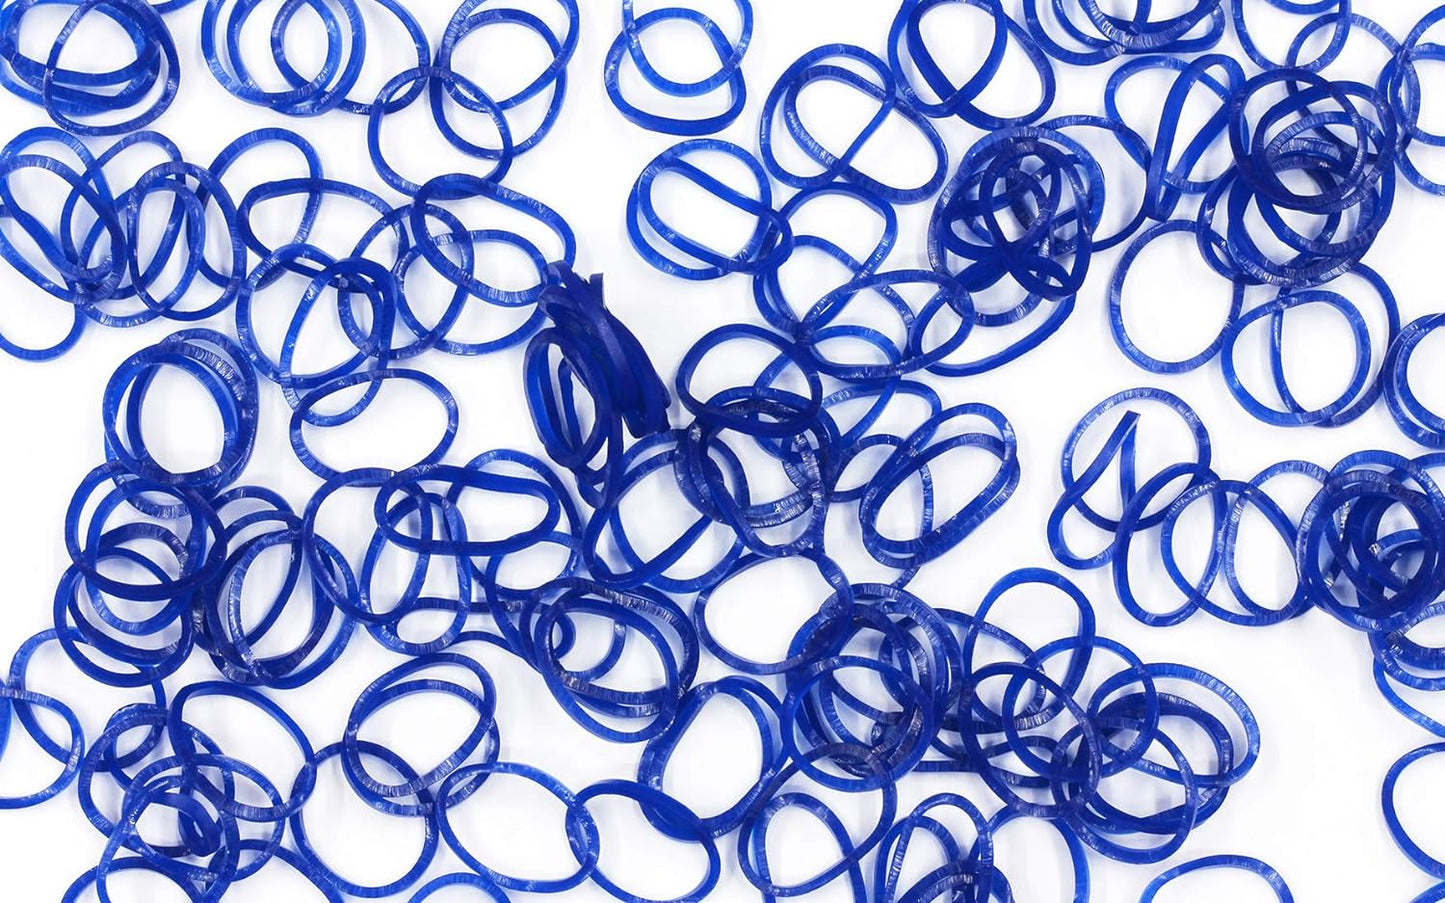 Navy Blue Jelly Rubber Bands Refill + C-Clips